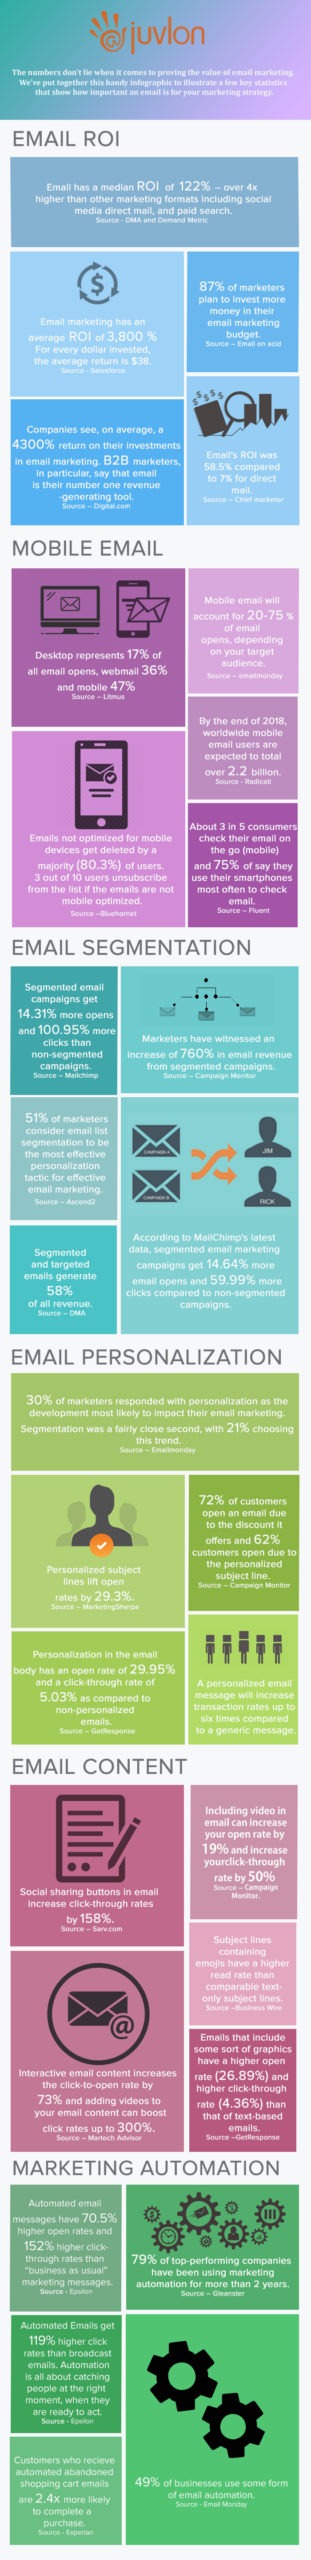 Email Marketing Statistics To Guide Your Email Campaigns
